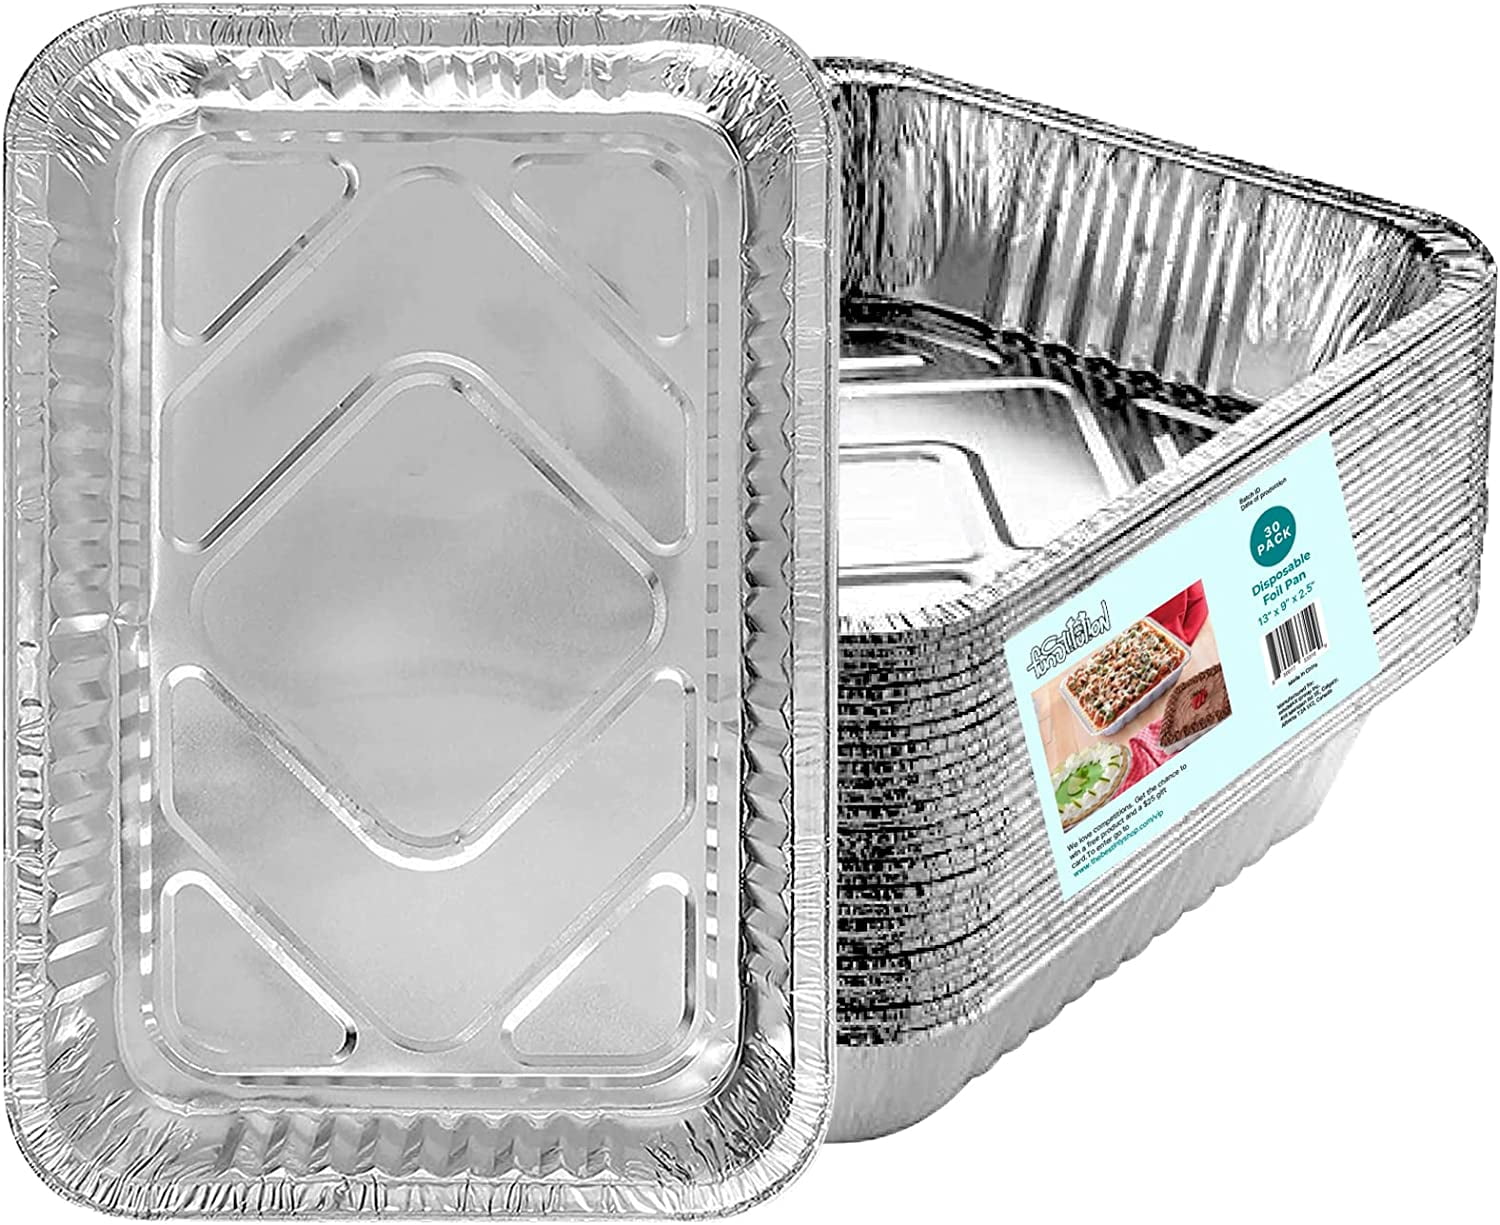 Disposable Aluminum 1/2 Size Baking Tray/ Cookie Sheets 16 x 11 x 1.25 (Pack of 100) (Set of 100) Nicole Fantini